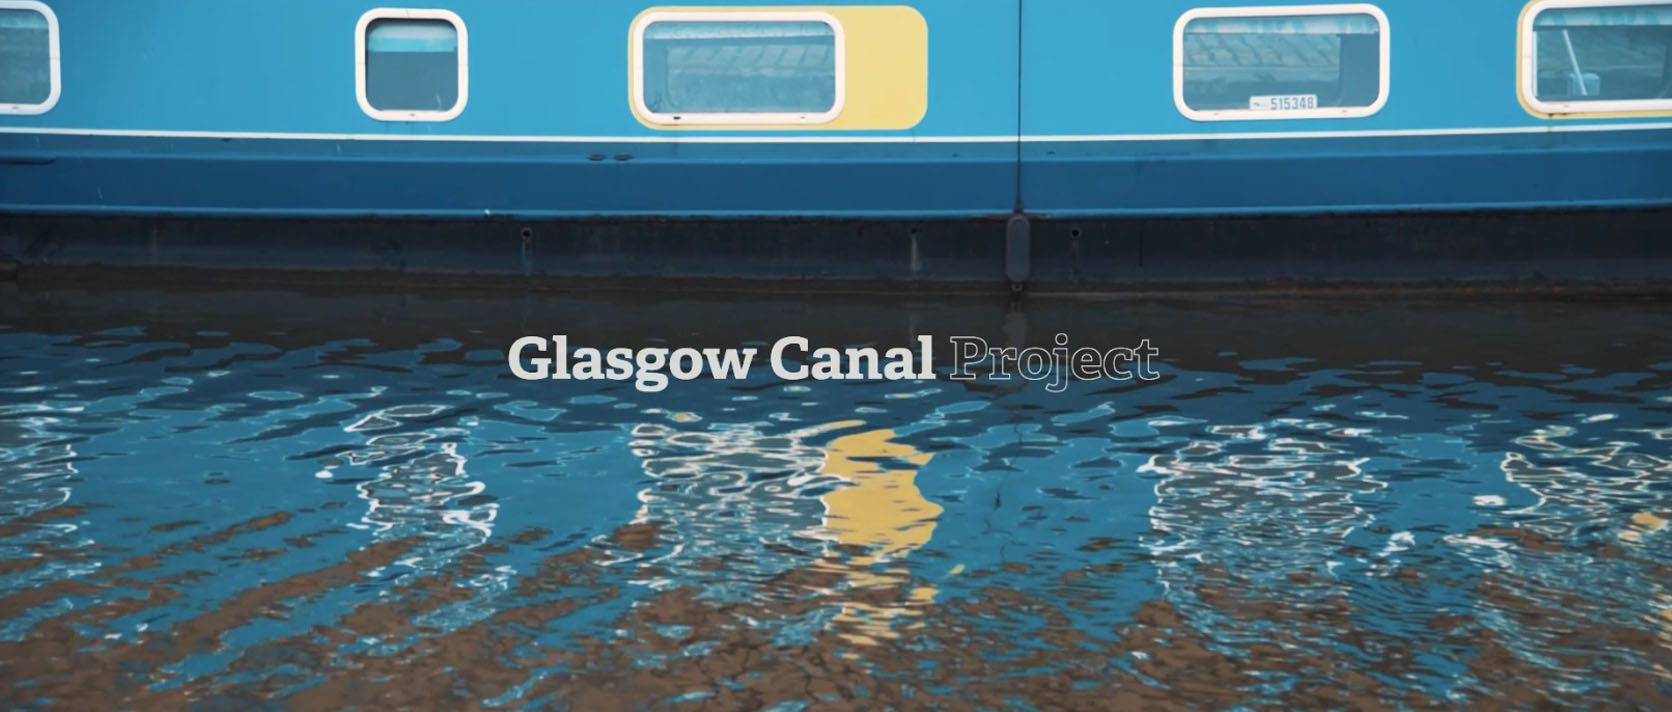 Glasgow Canal Project - Water Activity Video